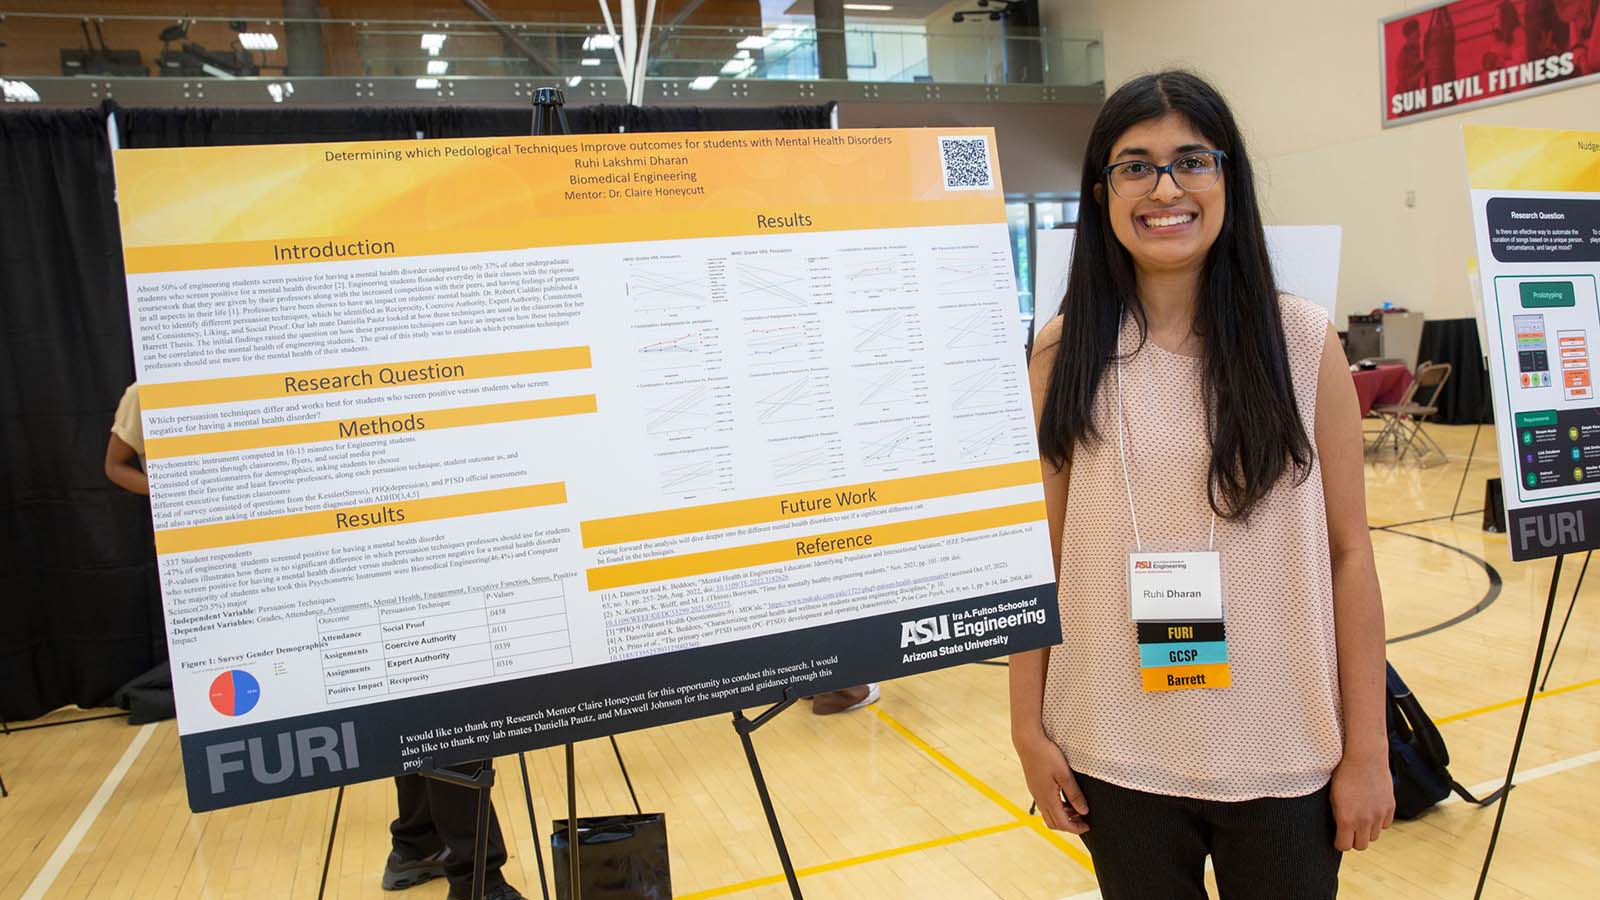 An ASU Engineering student researcher stands next to her research poster at a student research presentation event.